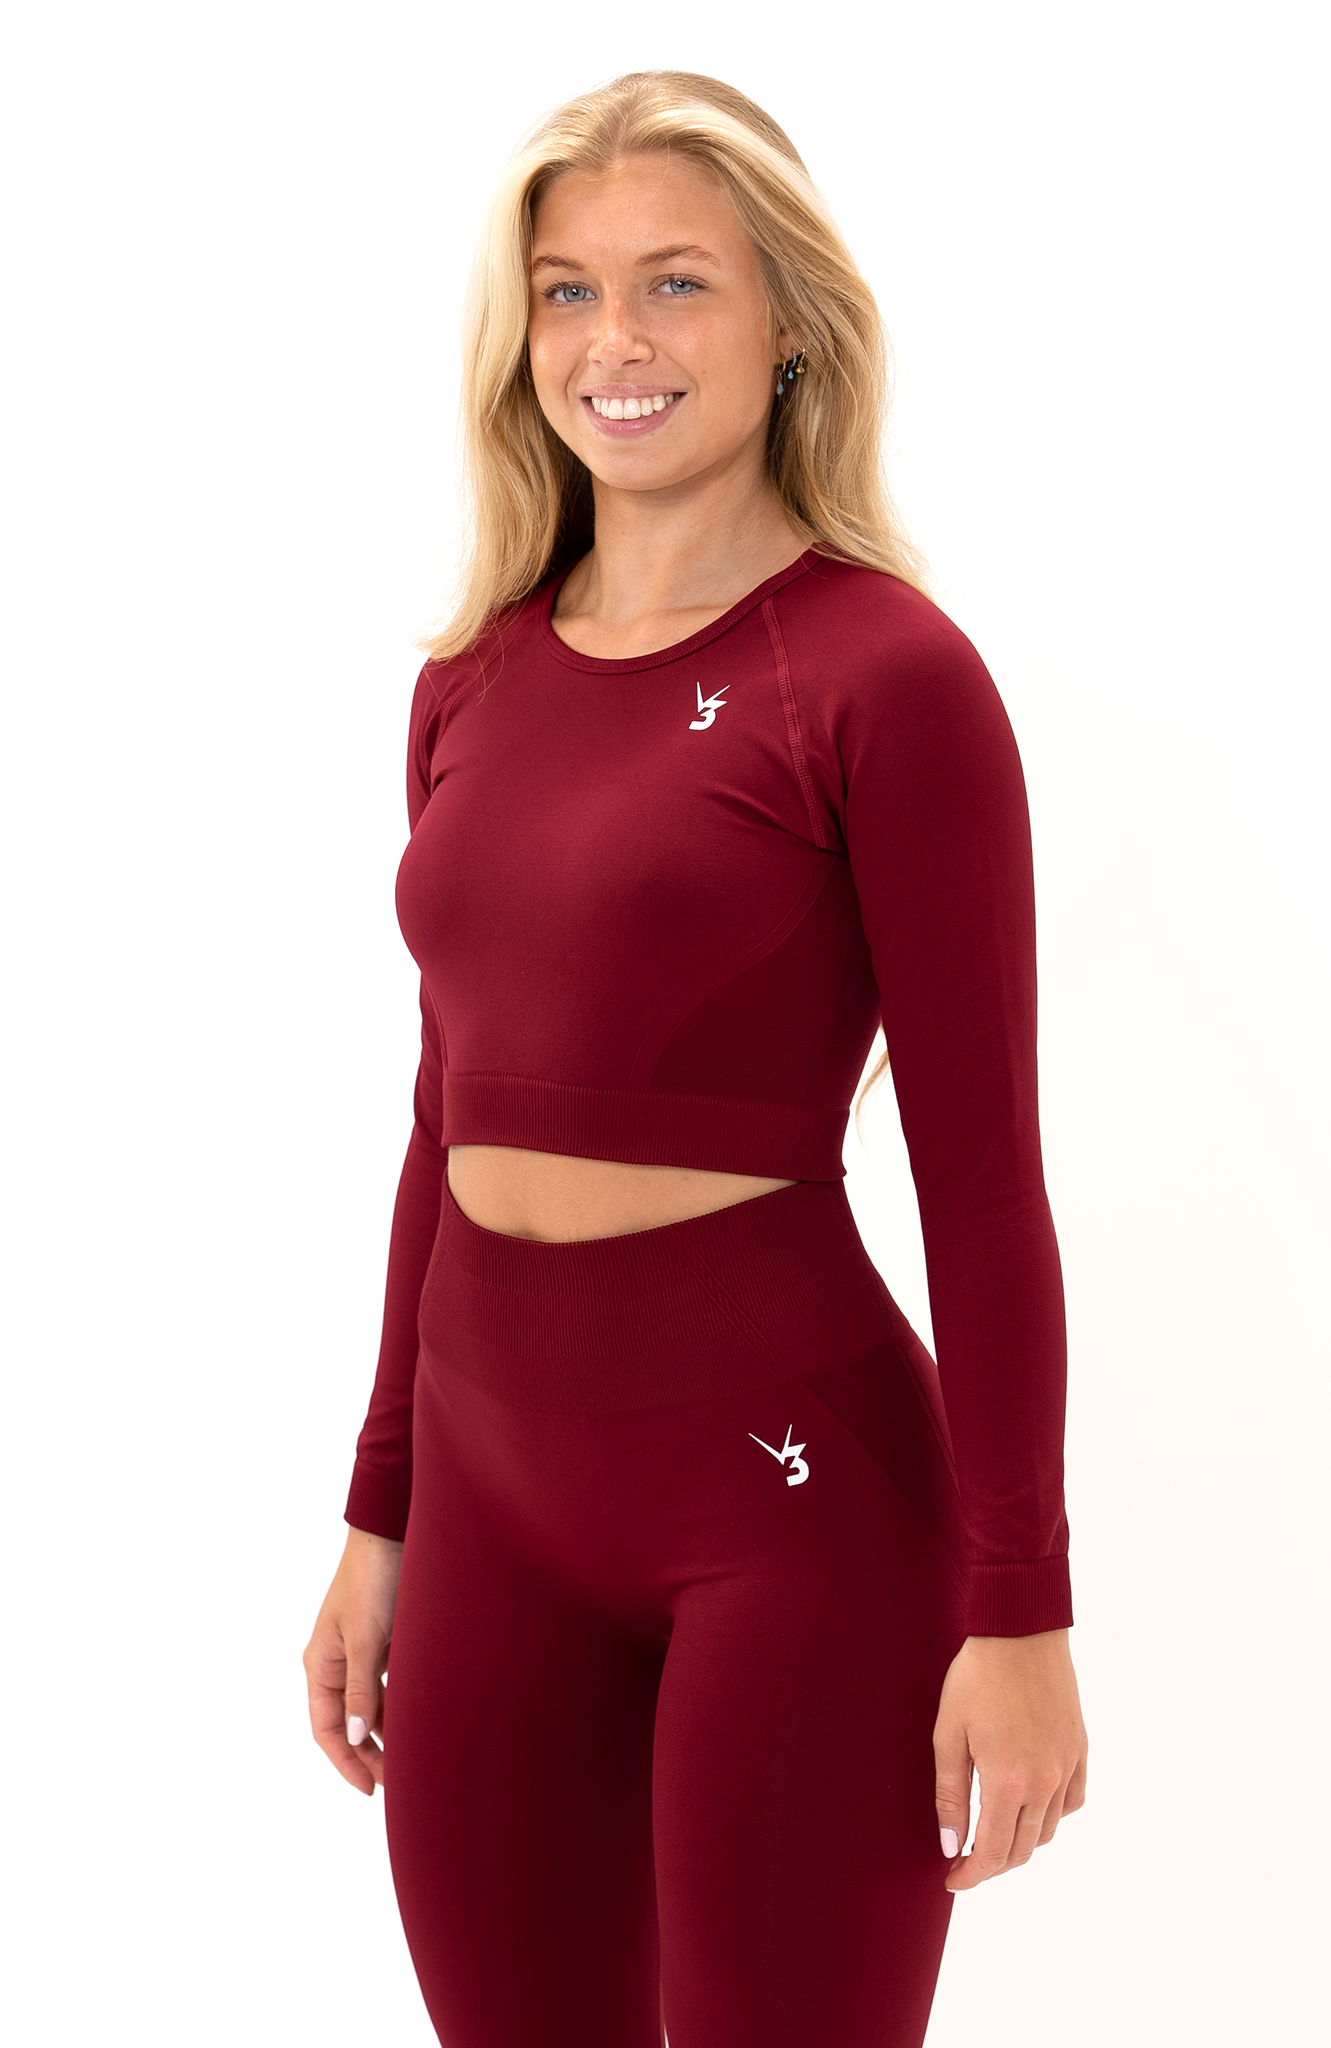 V3 Apparel Women's Tempo seamless long sleeve cropped training top in burgundy red with thumb hole long sleeves and crop fit for gym workouts training, Running, yoga, bodybuilding and bikini fitness.